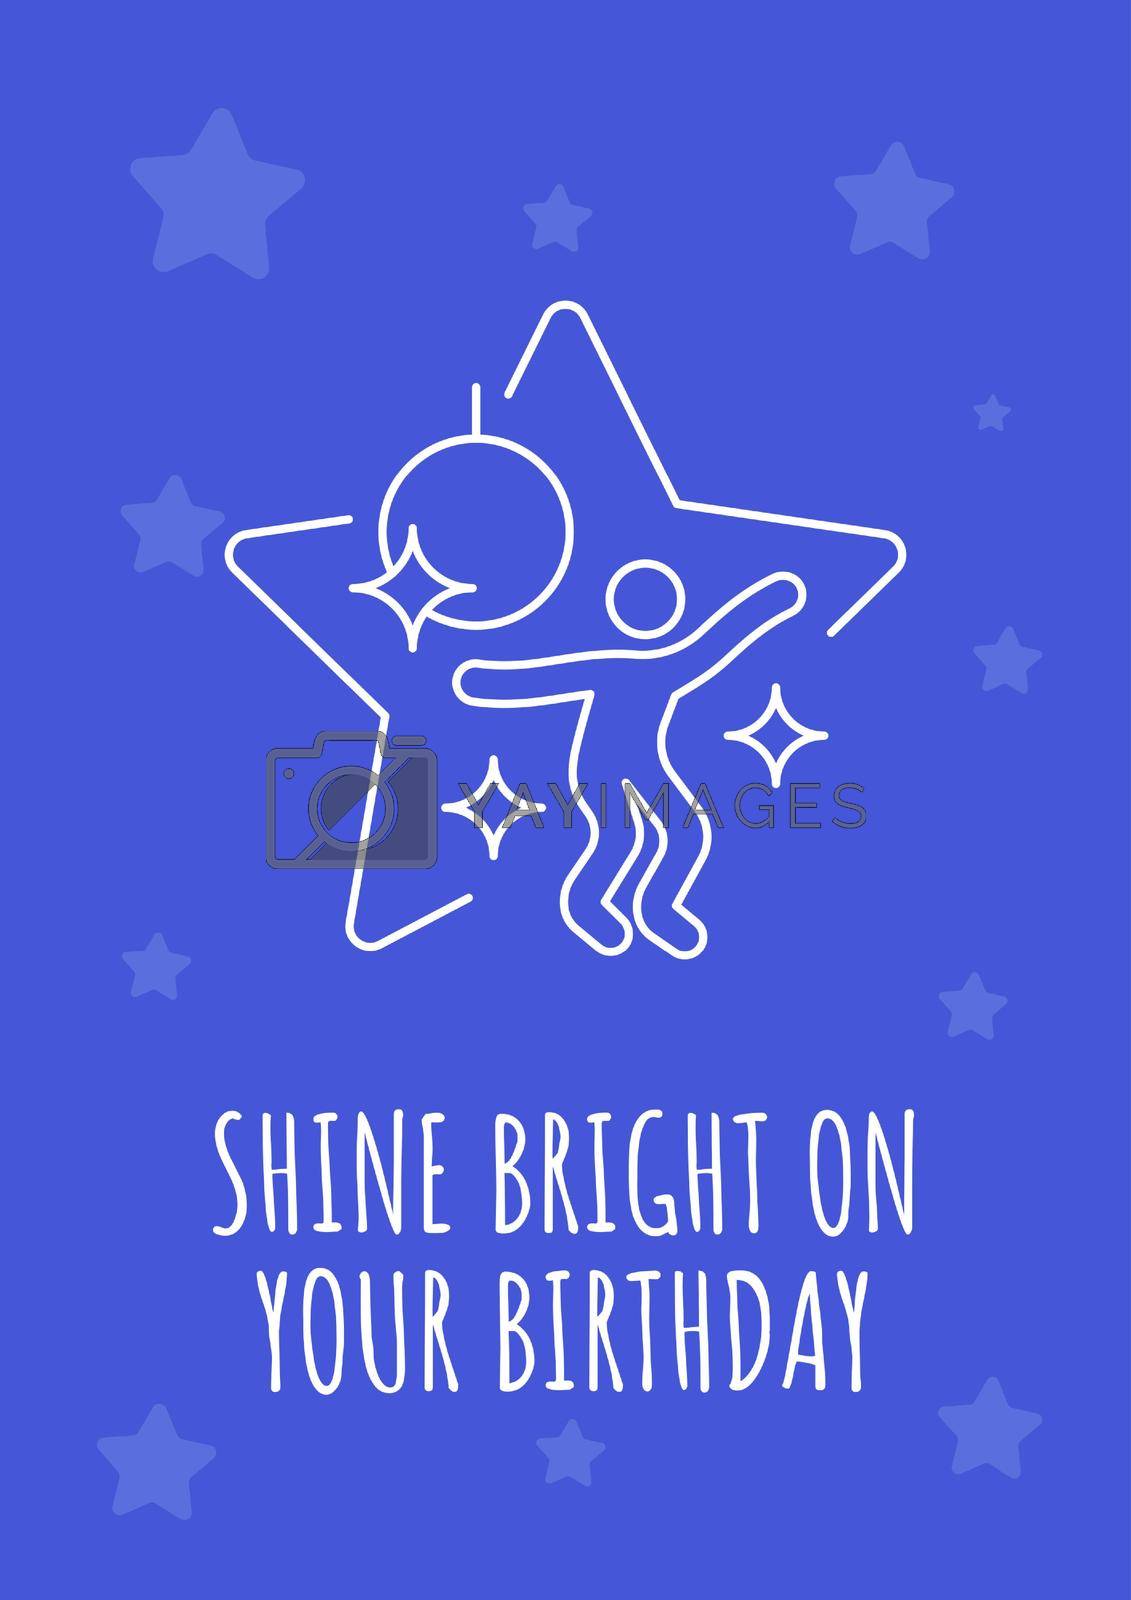 Birthday celebration with sparklers postcard with linear glyph icon. Greeting card with decorative vector design. Simple style poster with creative lineart illustration. Flyer with holiday wish